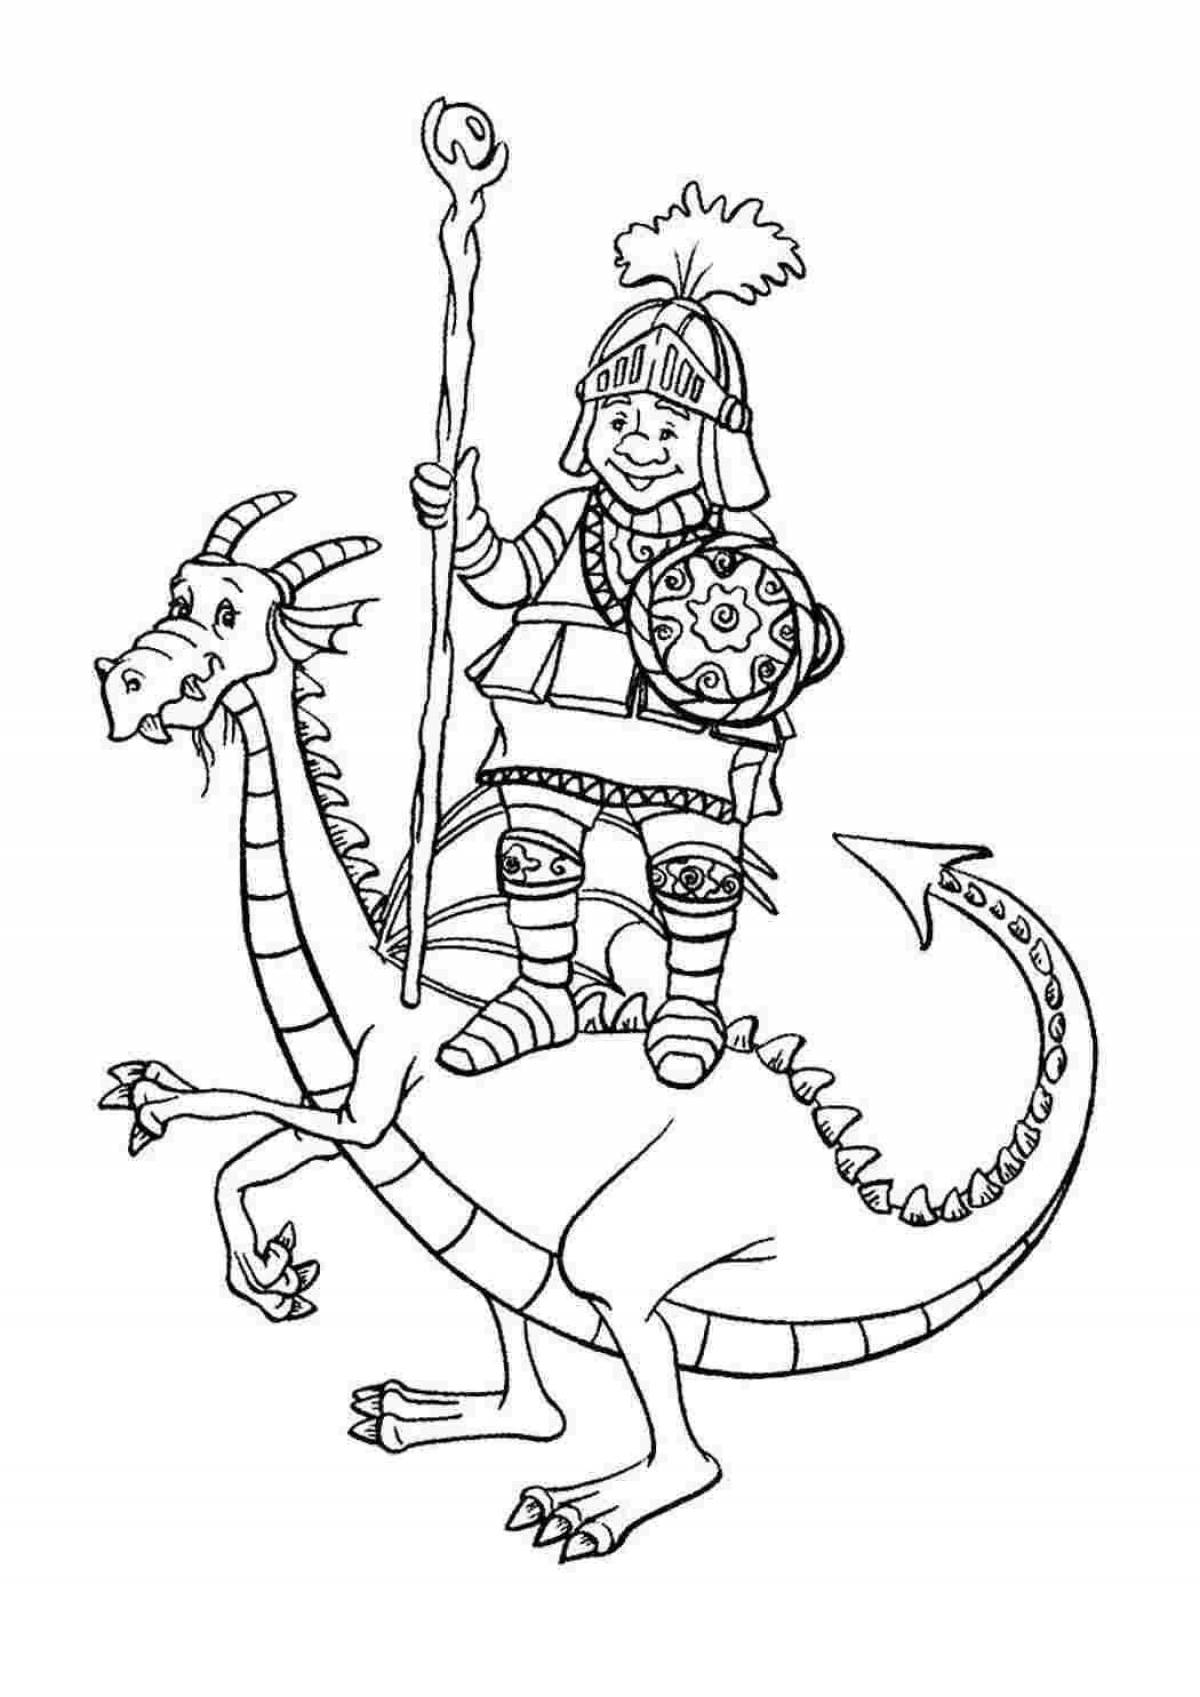 Exalted coloring book for knight boys